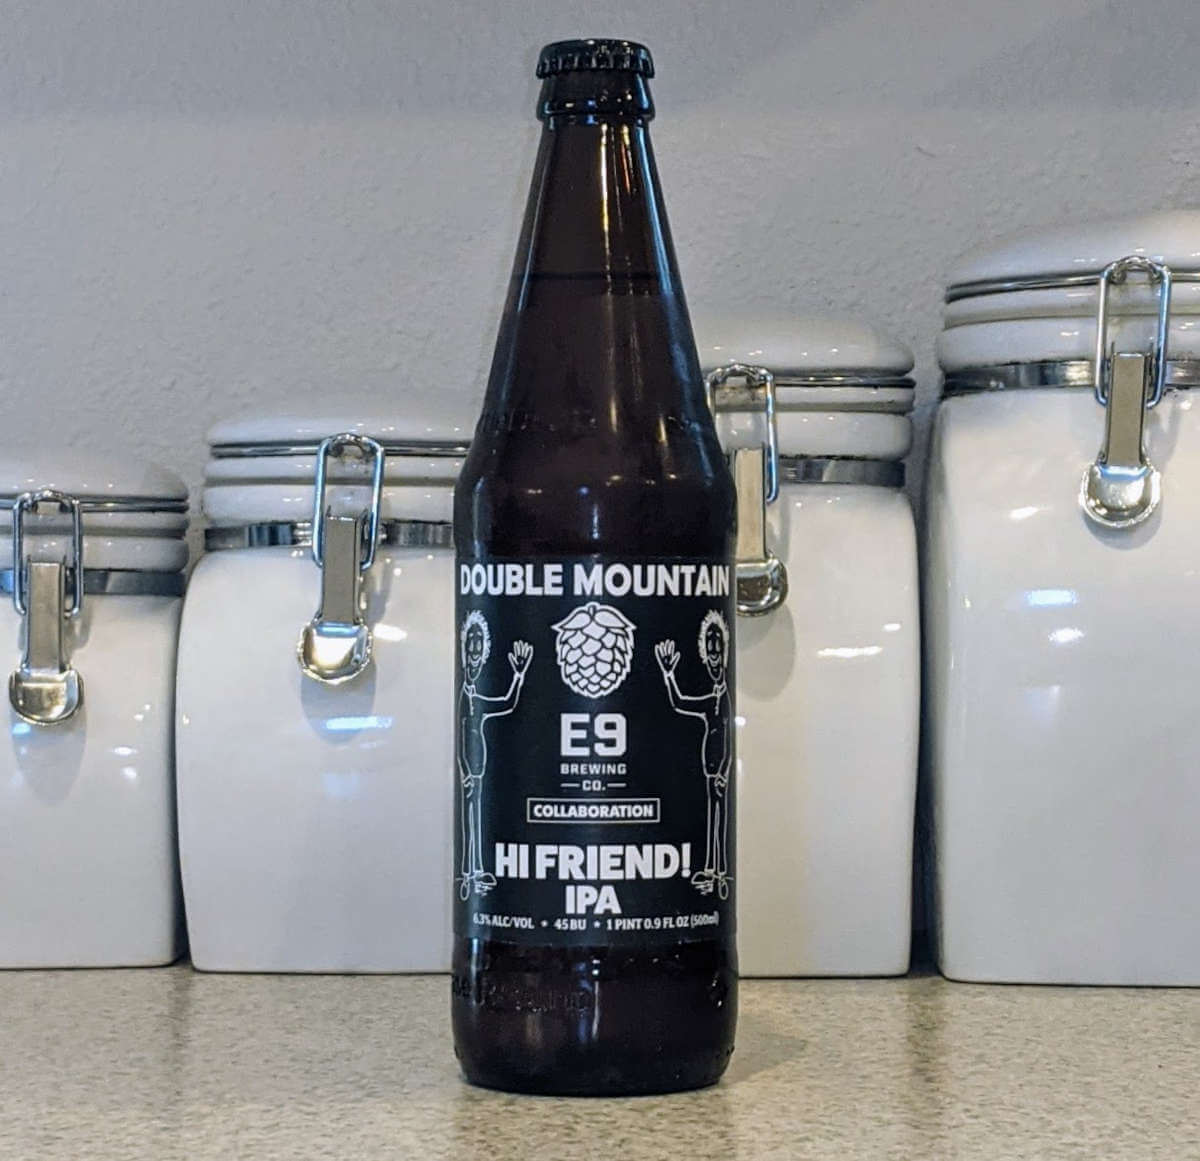 Received: Double Mountain Brewery Hi Friend! IPA